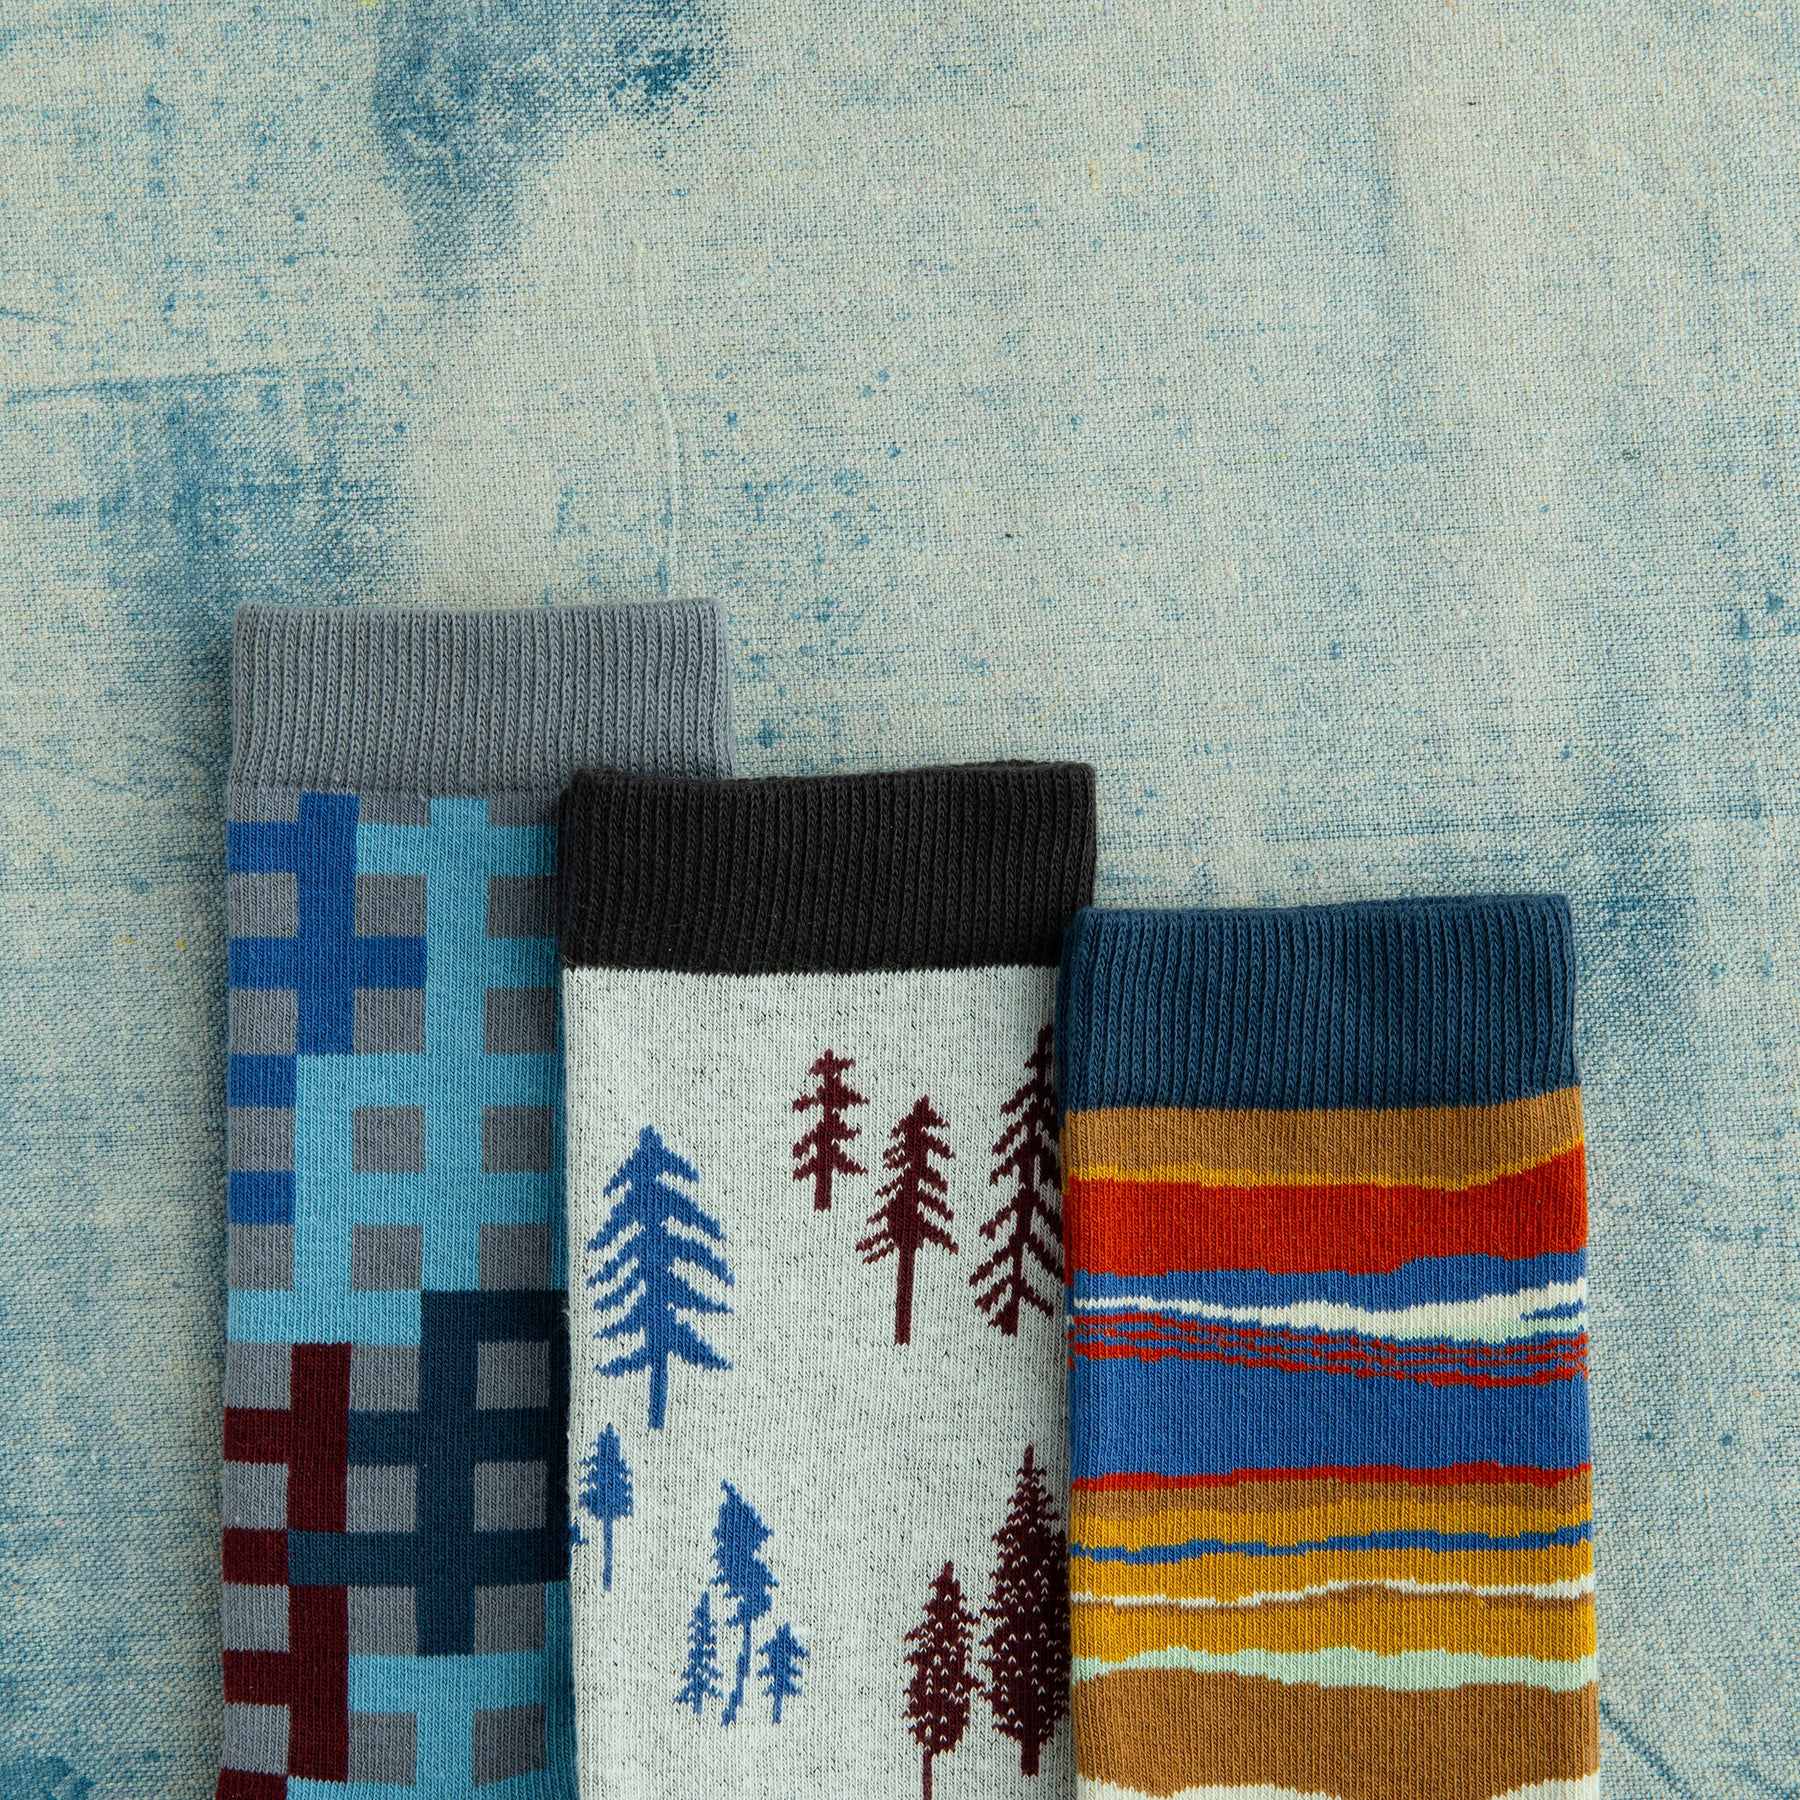 men's patterned organic cotton socks on a painted surface